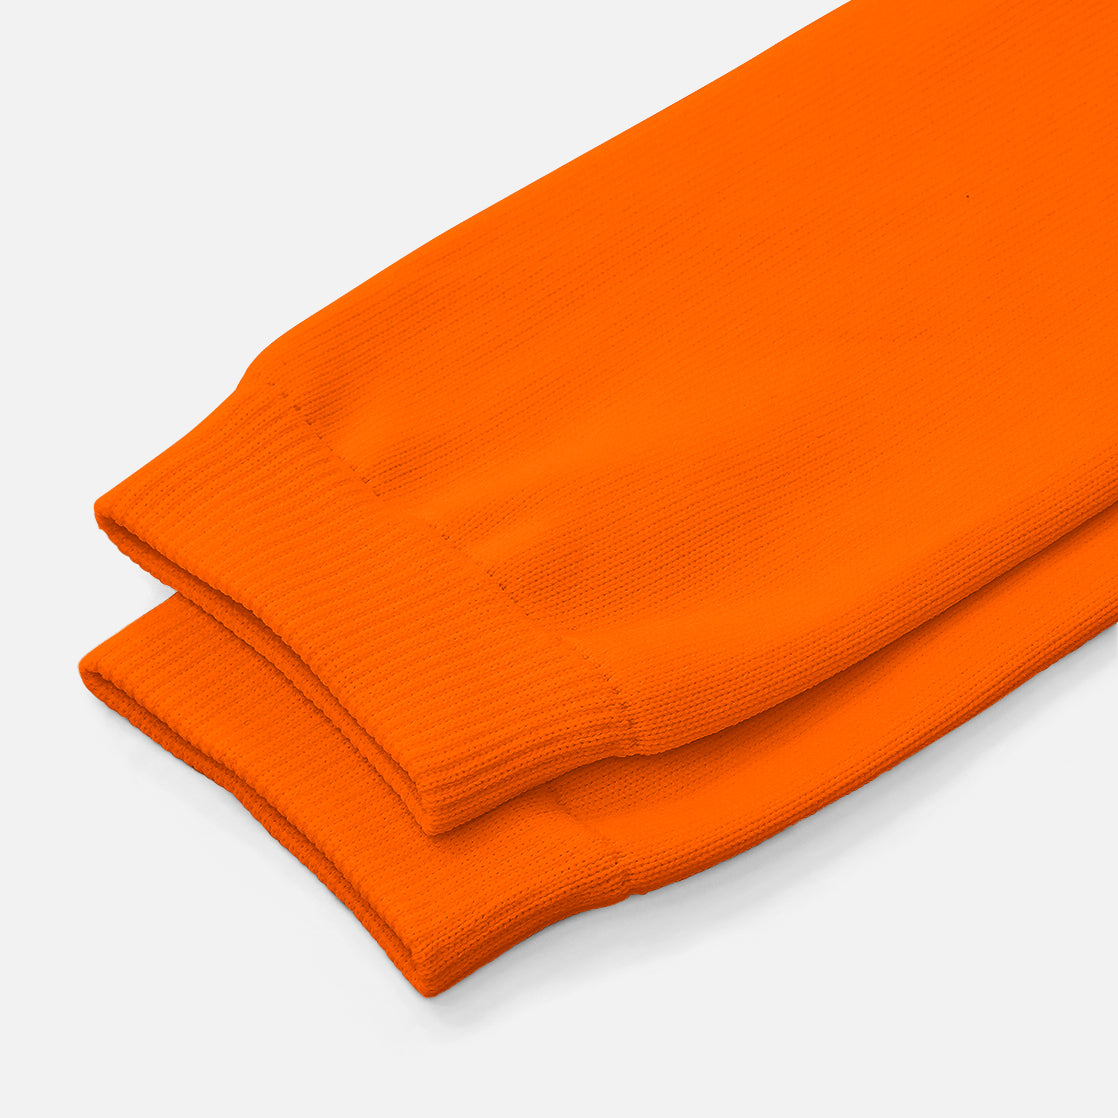 Hot Orange Knitted Compression Calf Sleeves